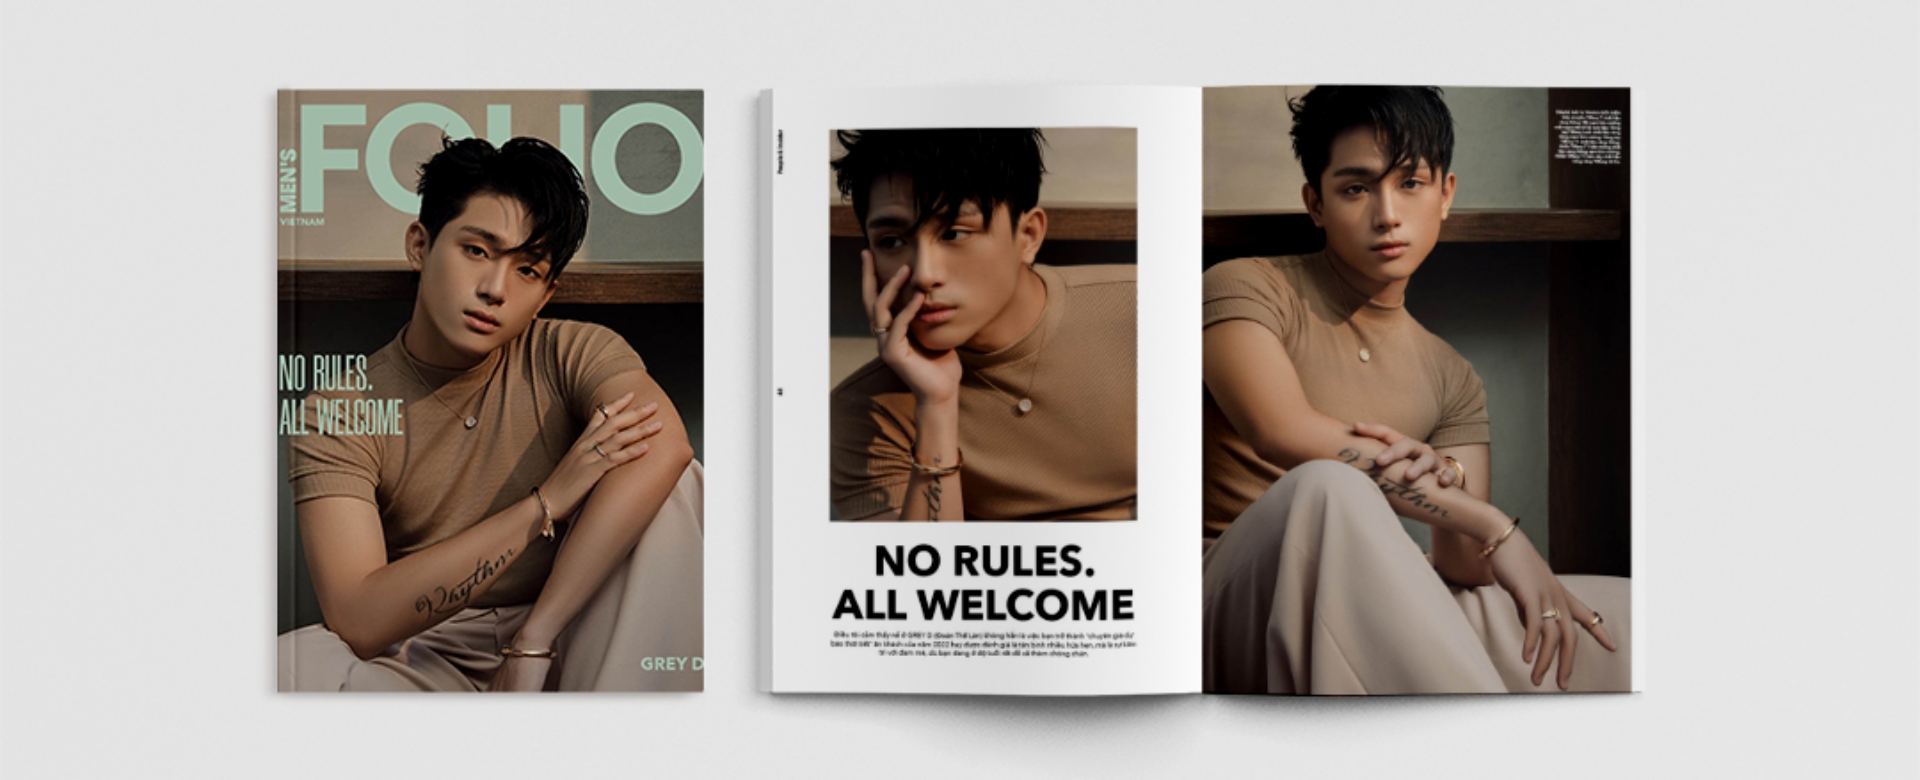 Men’s Folio Vietnam #15: No Rules. All Welcome Special Issue – Thiết lập vòng quay 365 ngày mới